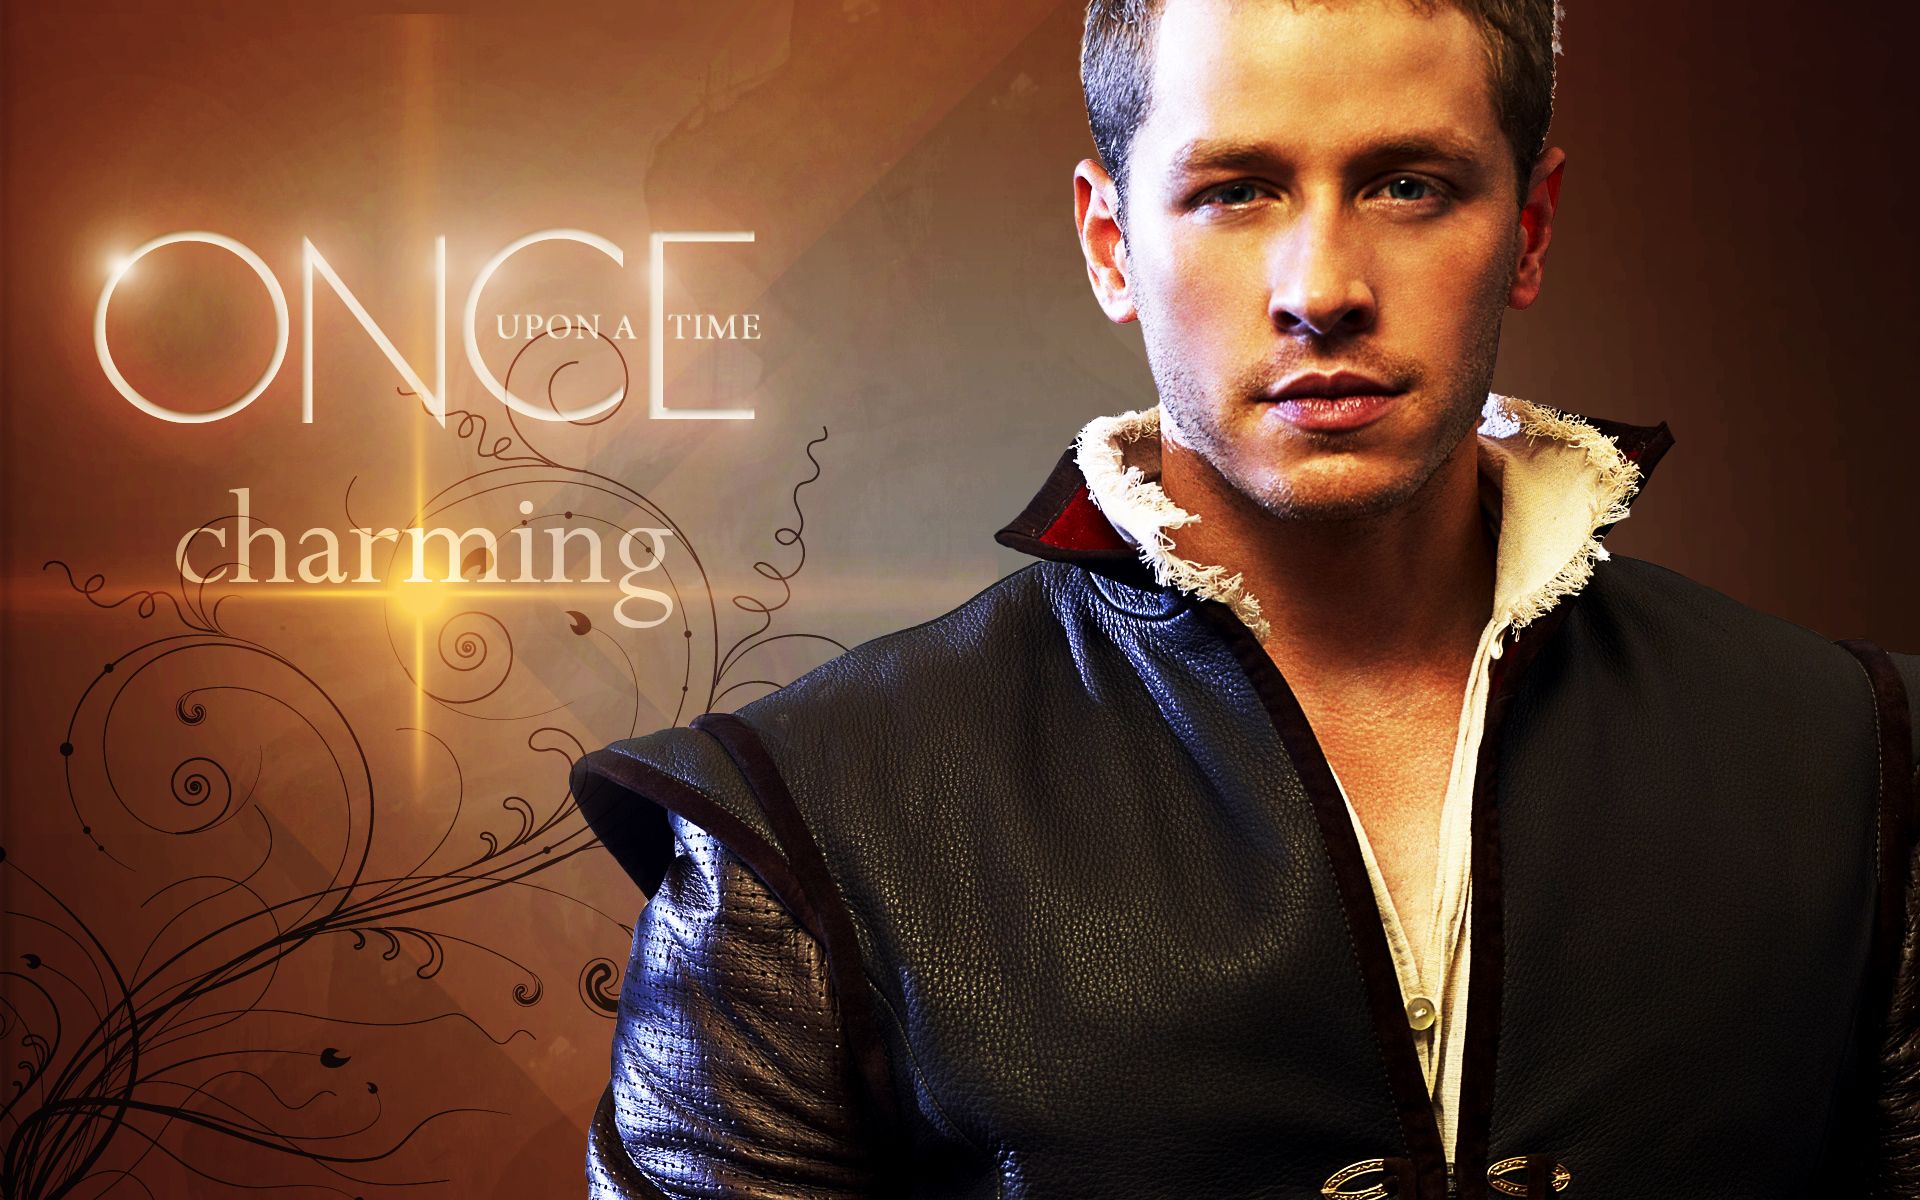 Once Upon A Time Wallpaper: Prince Charming. Prince charming, Once upon a time, Prince